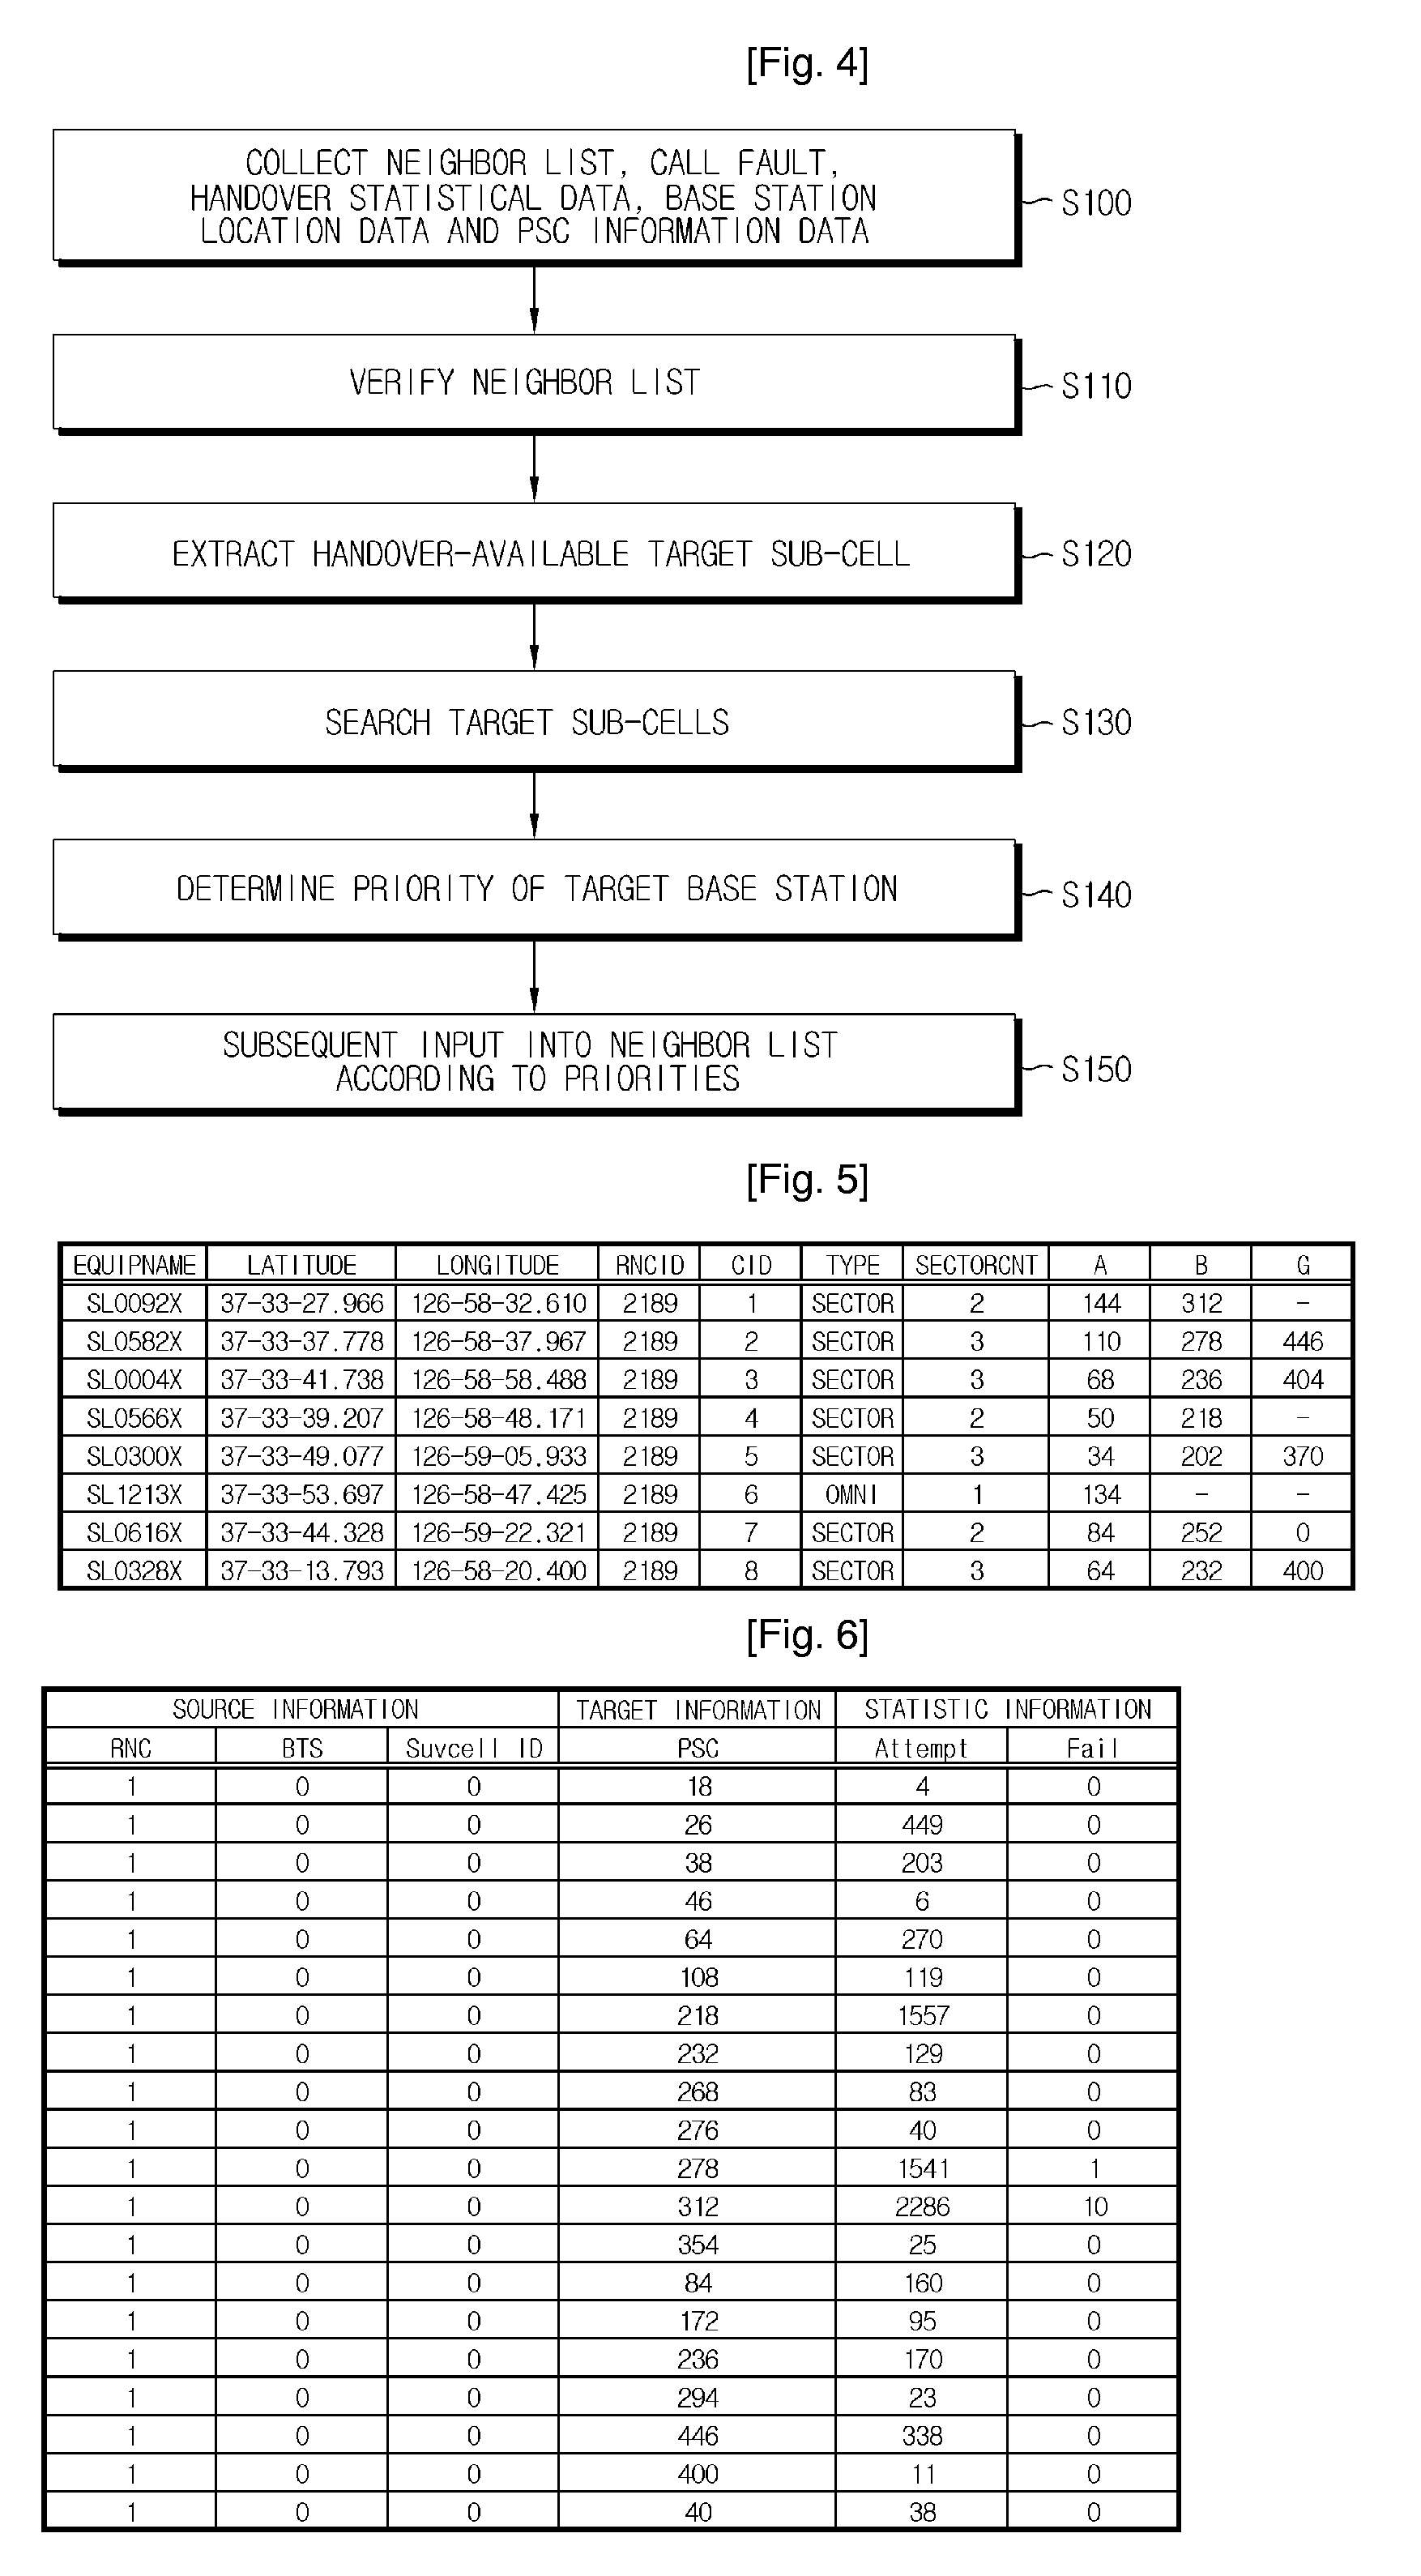 Method and Apparatus For Optimizing Neighbor List Automatically in Asynchronous Wcdma Network